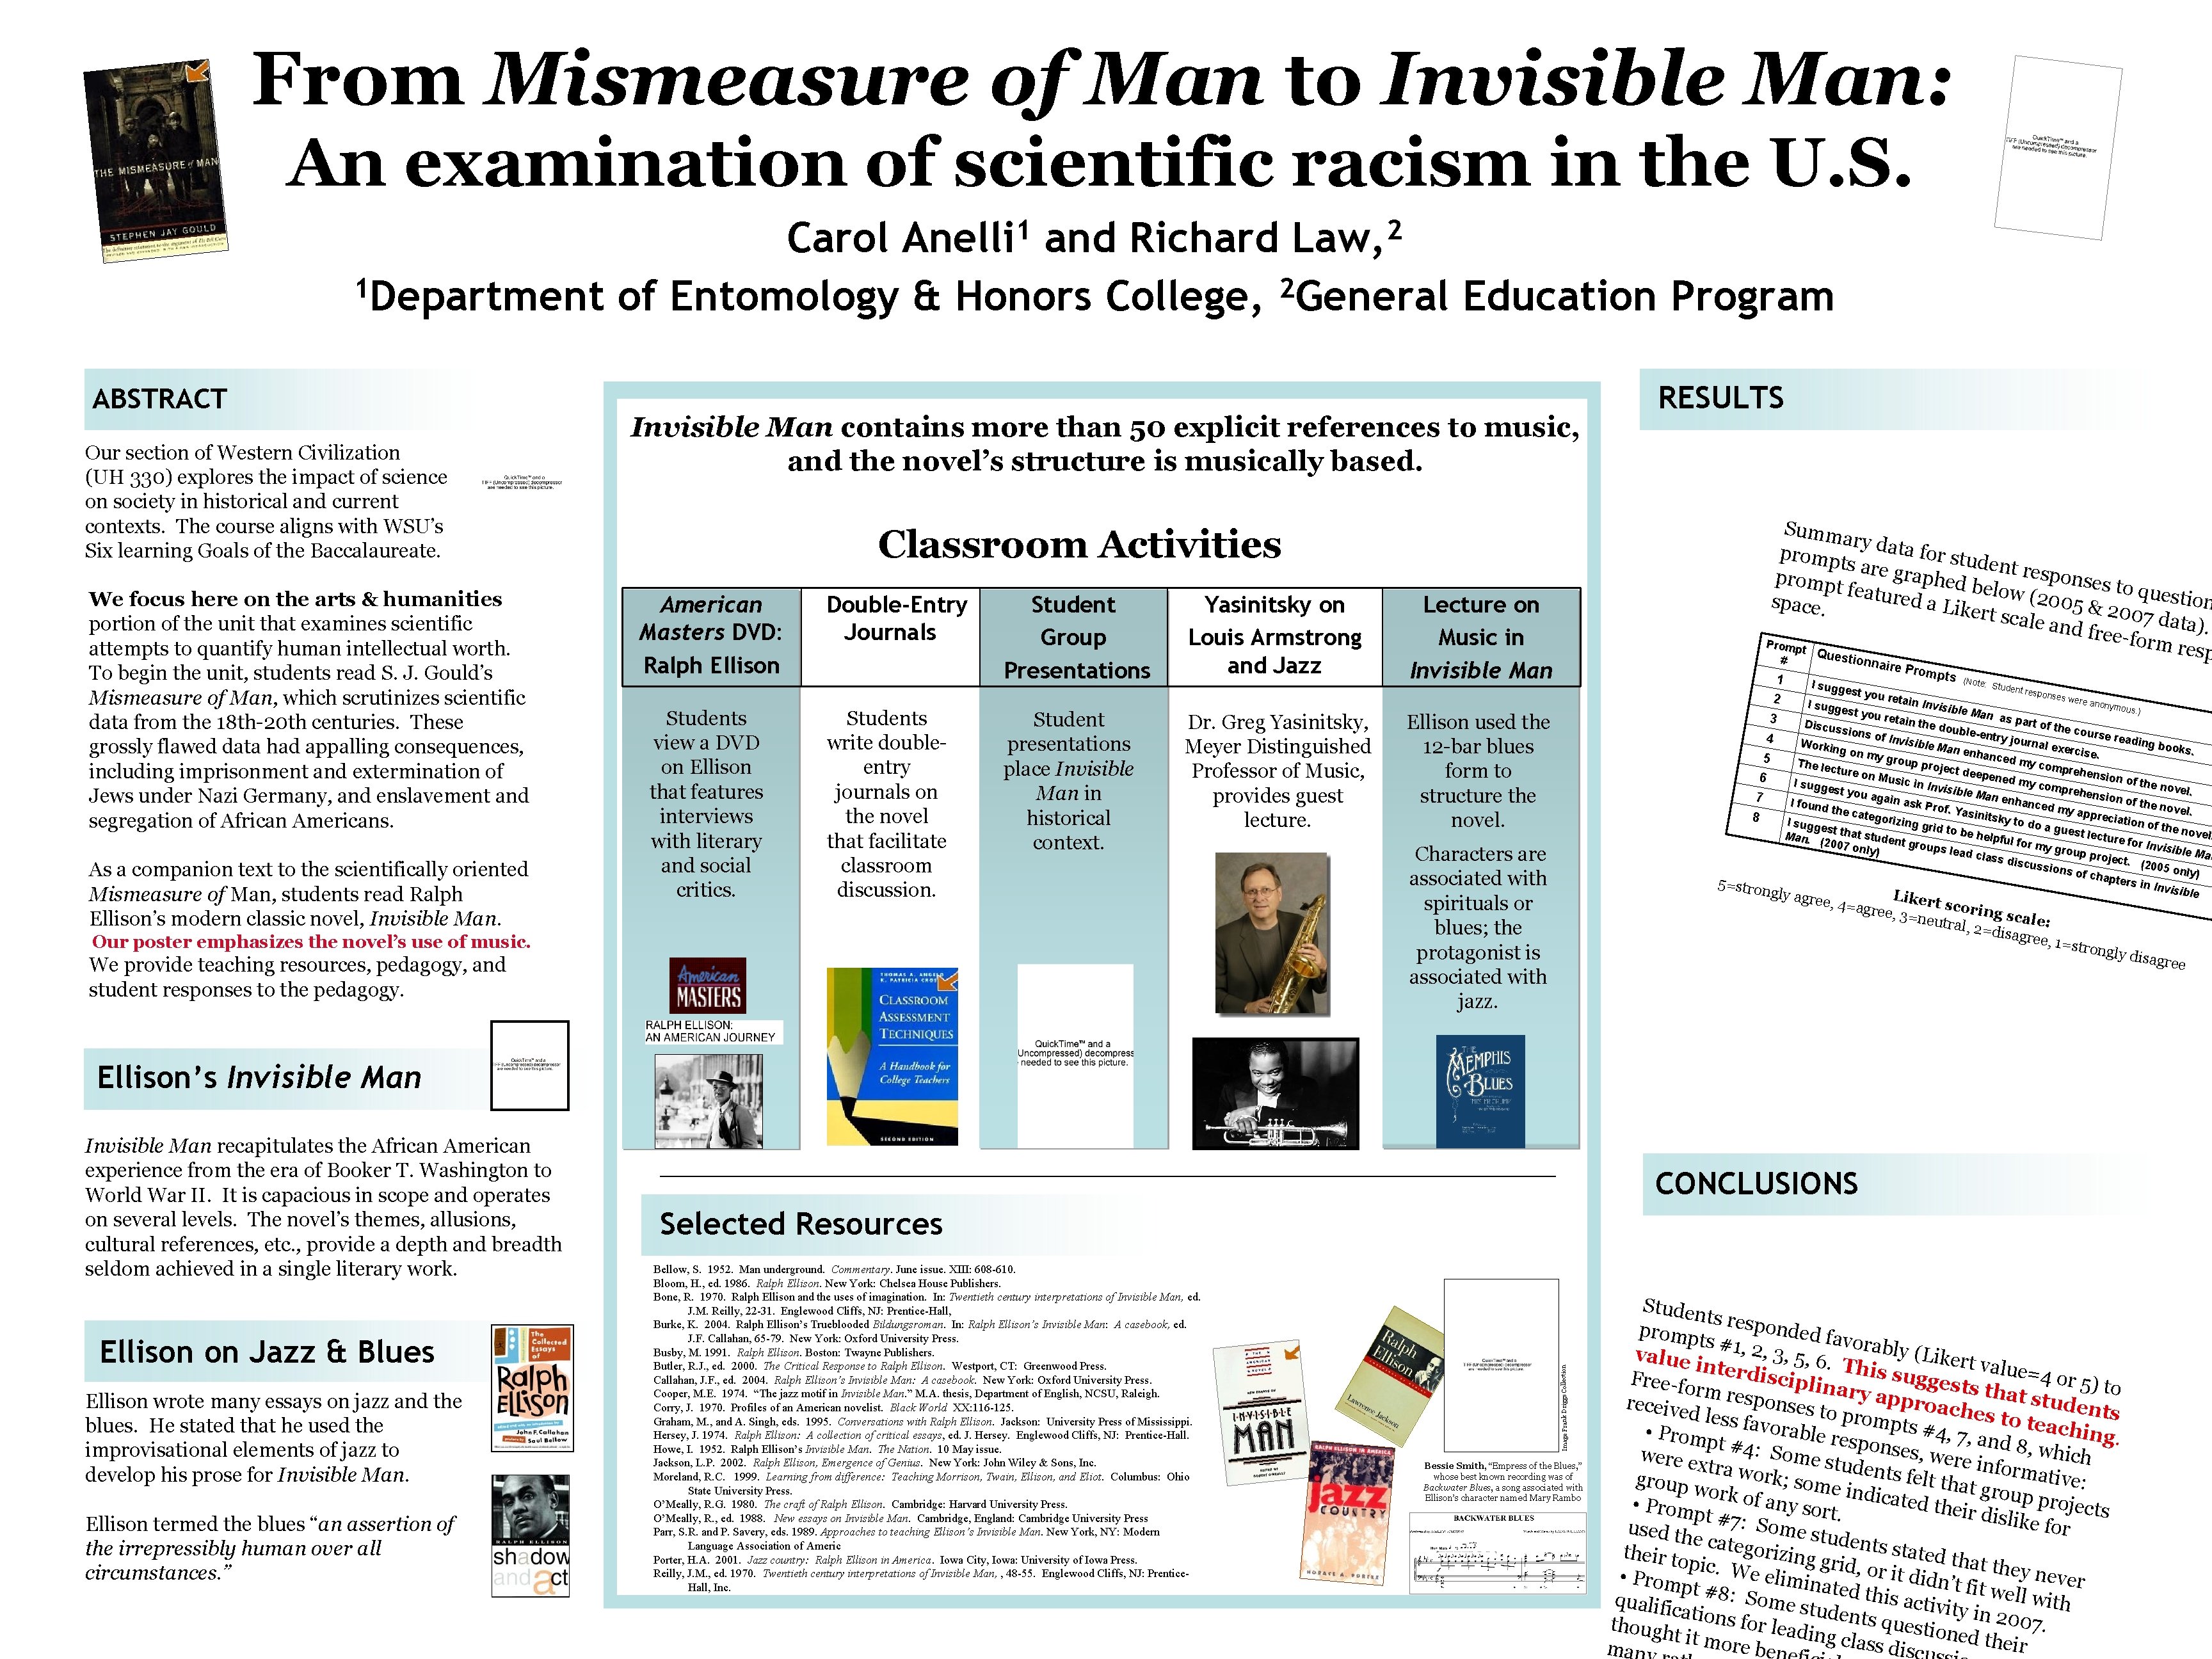 From Mismeasure of Man to Invisible Man: An examination of scientific racism in the